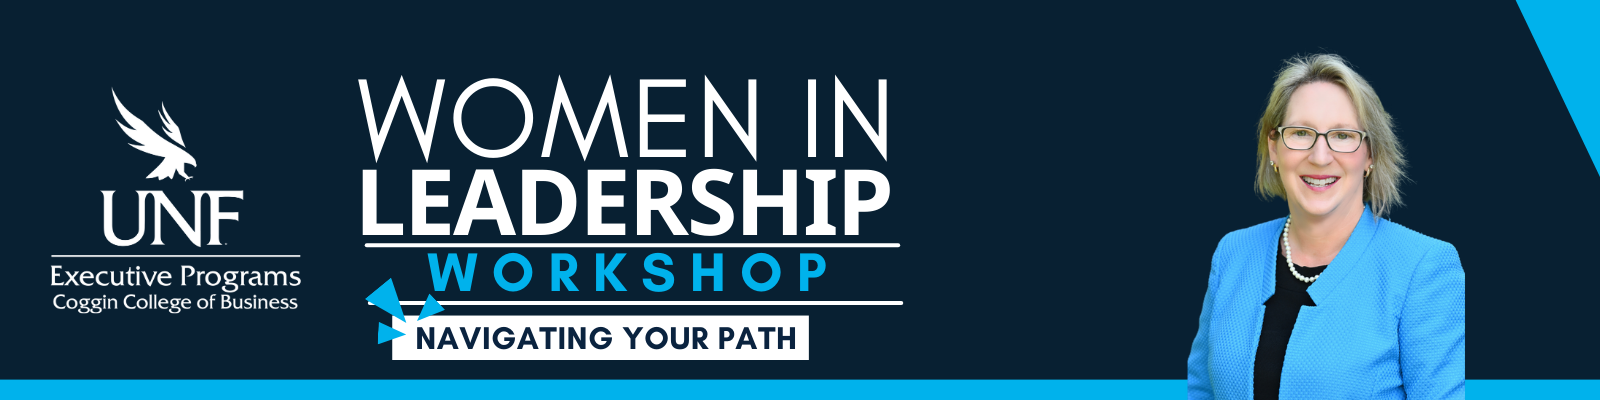 unf executive programs coggin college of business women in leadership workshop navigating your path